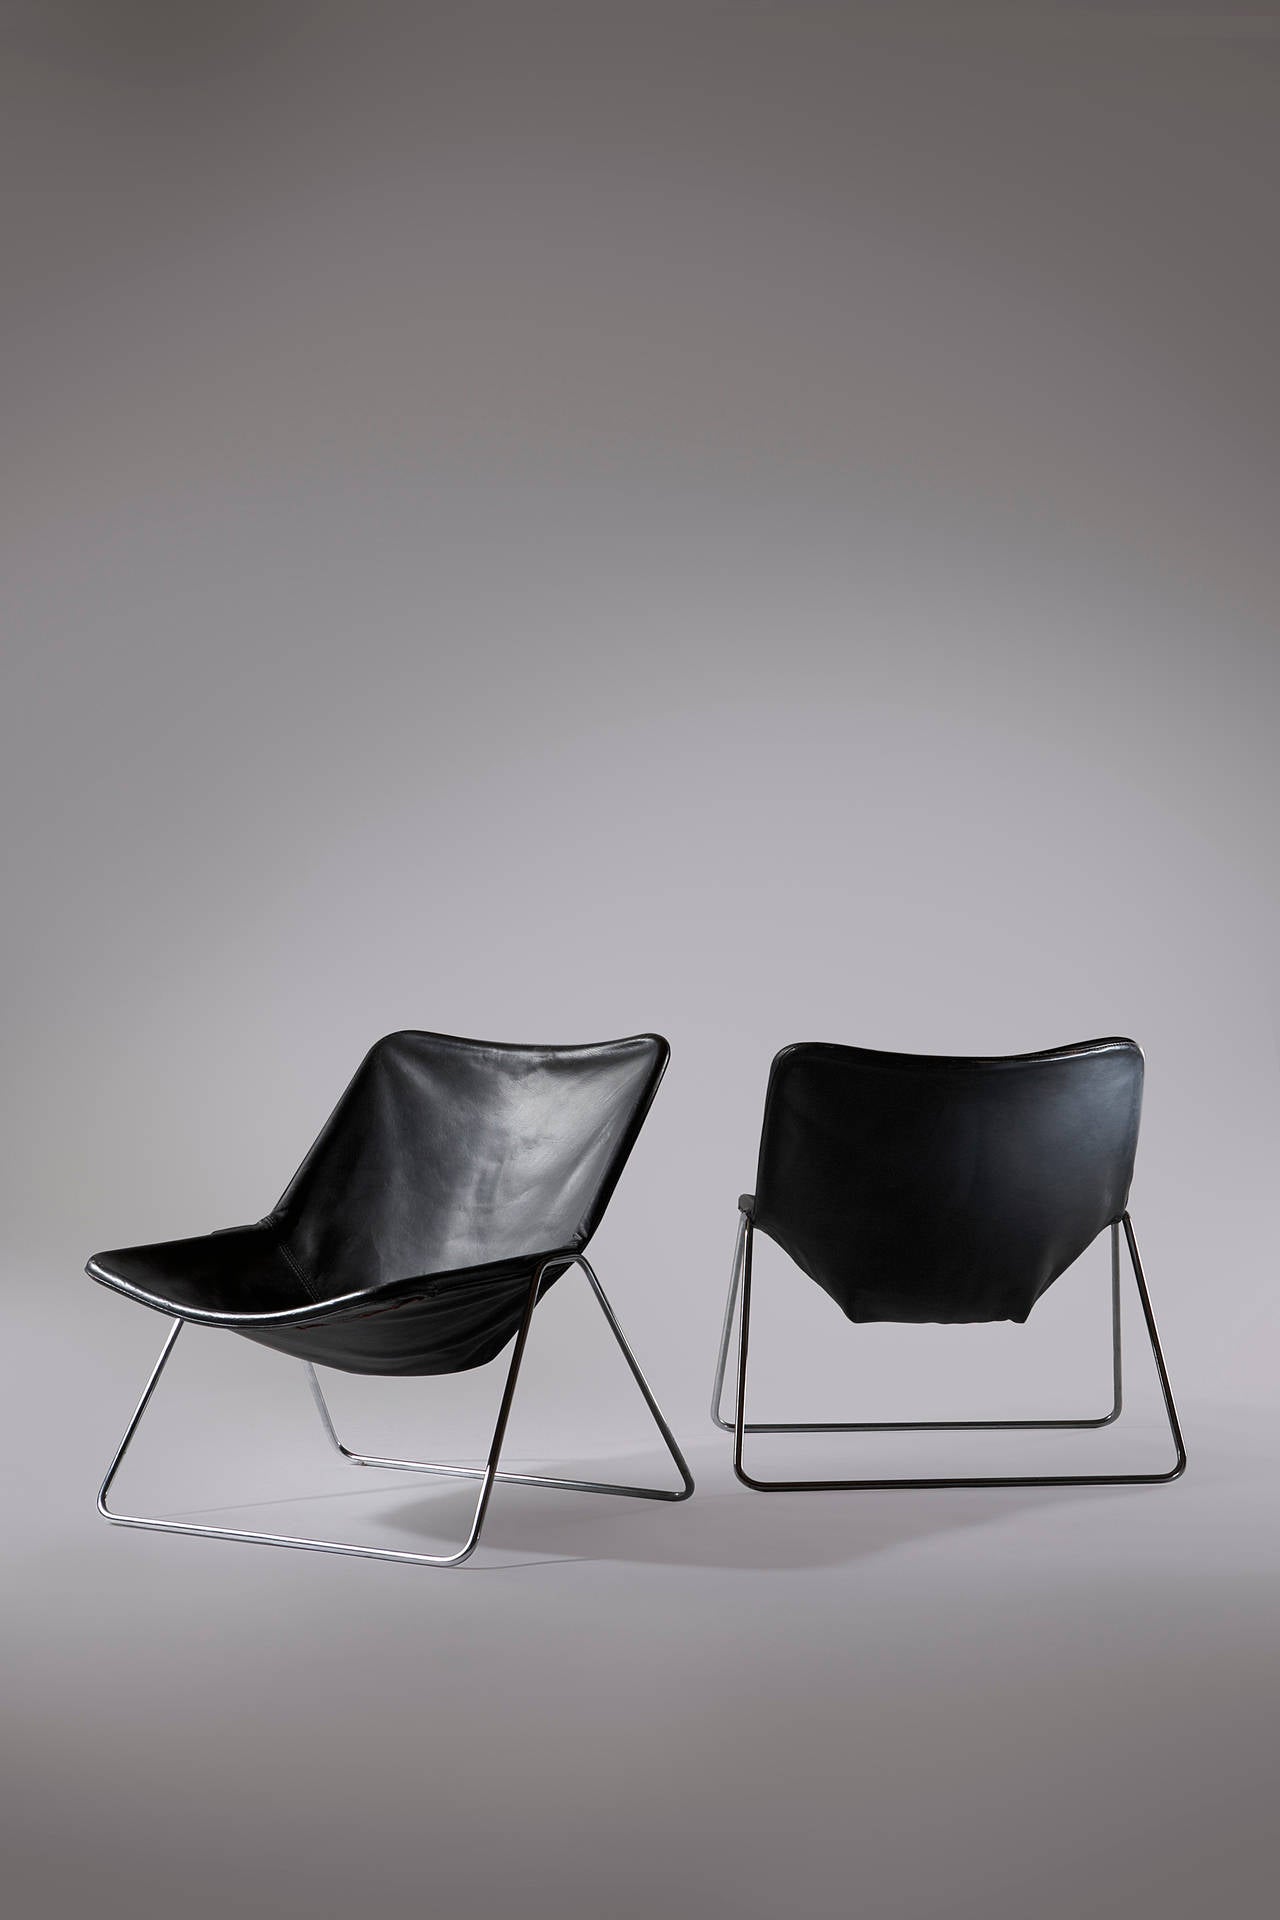 Pair of G1 chairs by Pierre Guariche in original leather fabric with steel frame. The first series was designed in the 1950s and these chairs were produced in the 1970s for Airborne.

About the designer: Pierre Guariche (1926-1995) attended the